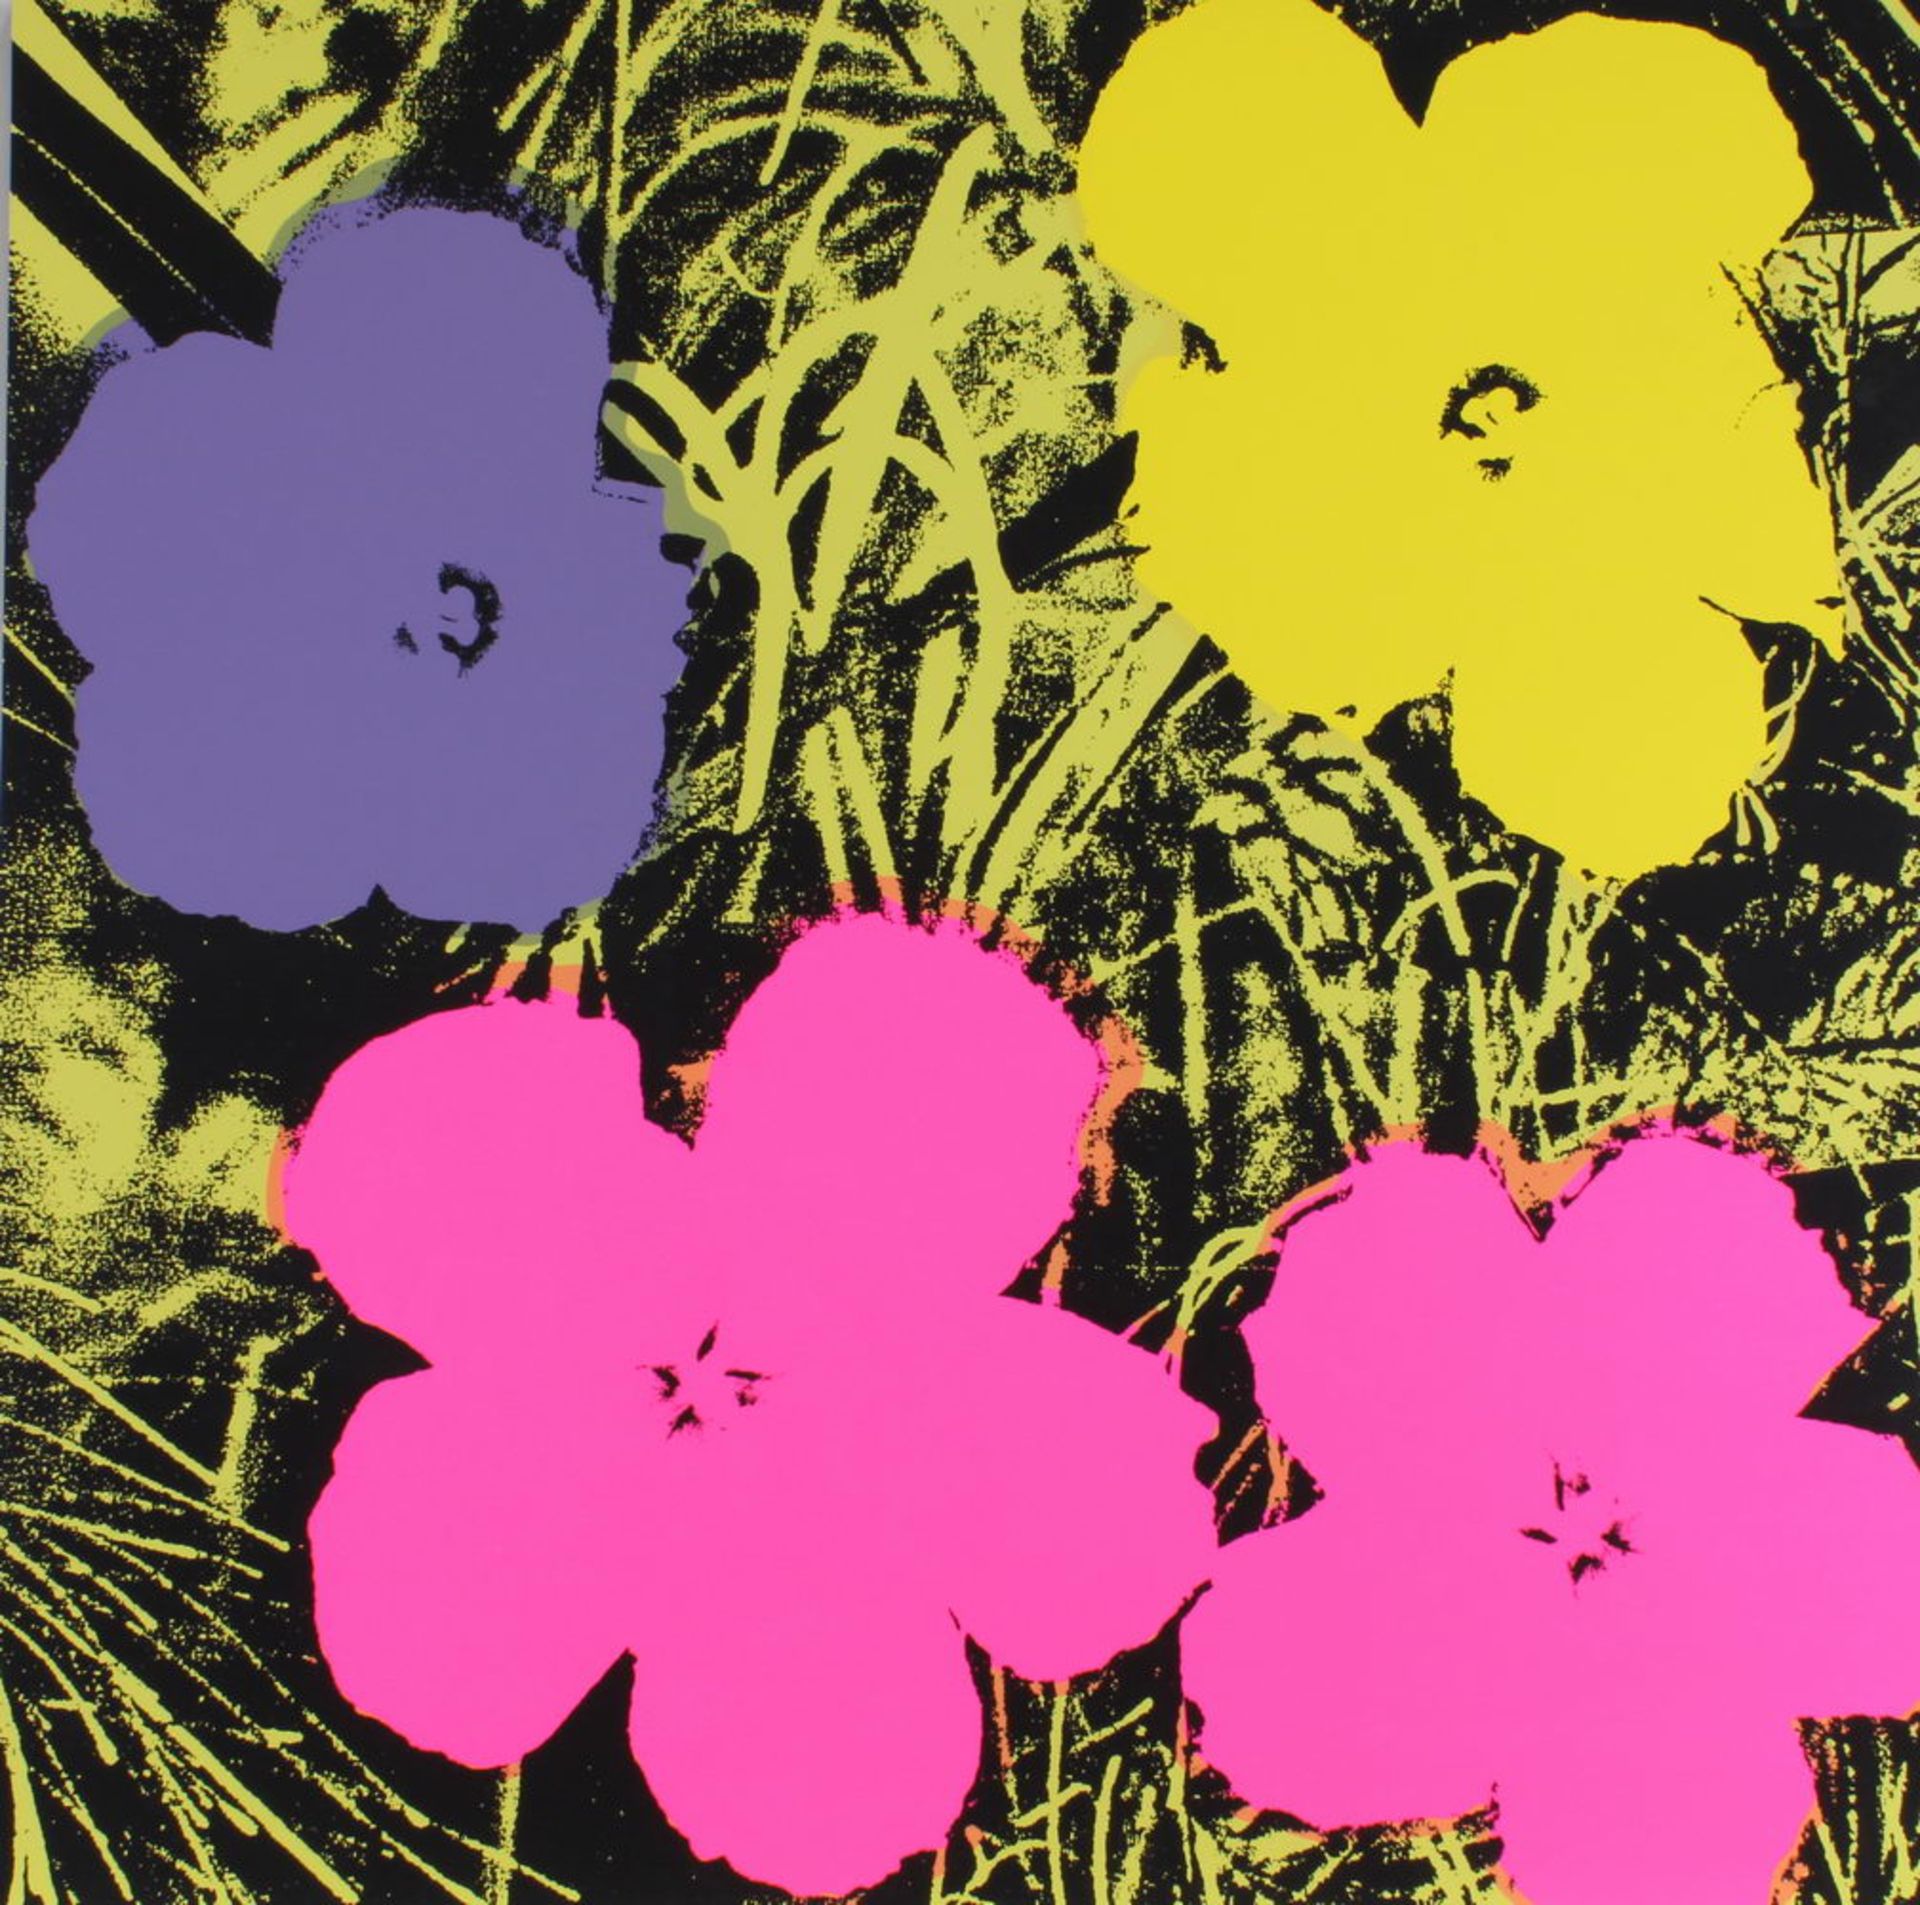 Warhol, Andy (1928 Pittsburgh - 1987 New York), 10 Farbserigrafien, "Flowers", published by Sunday - Image 6 of 10